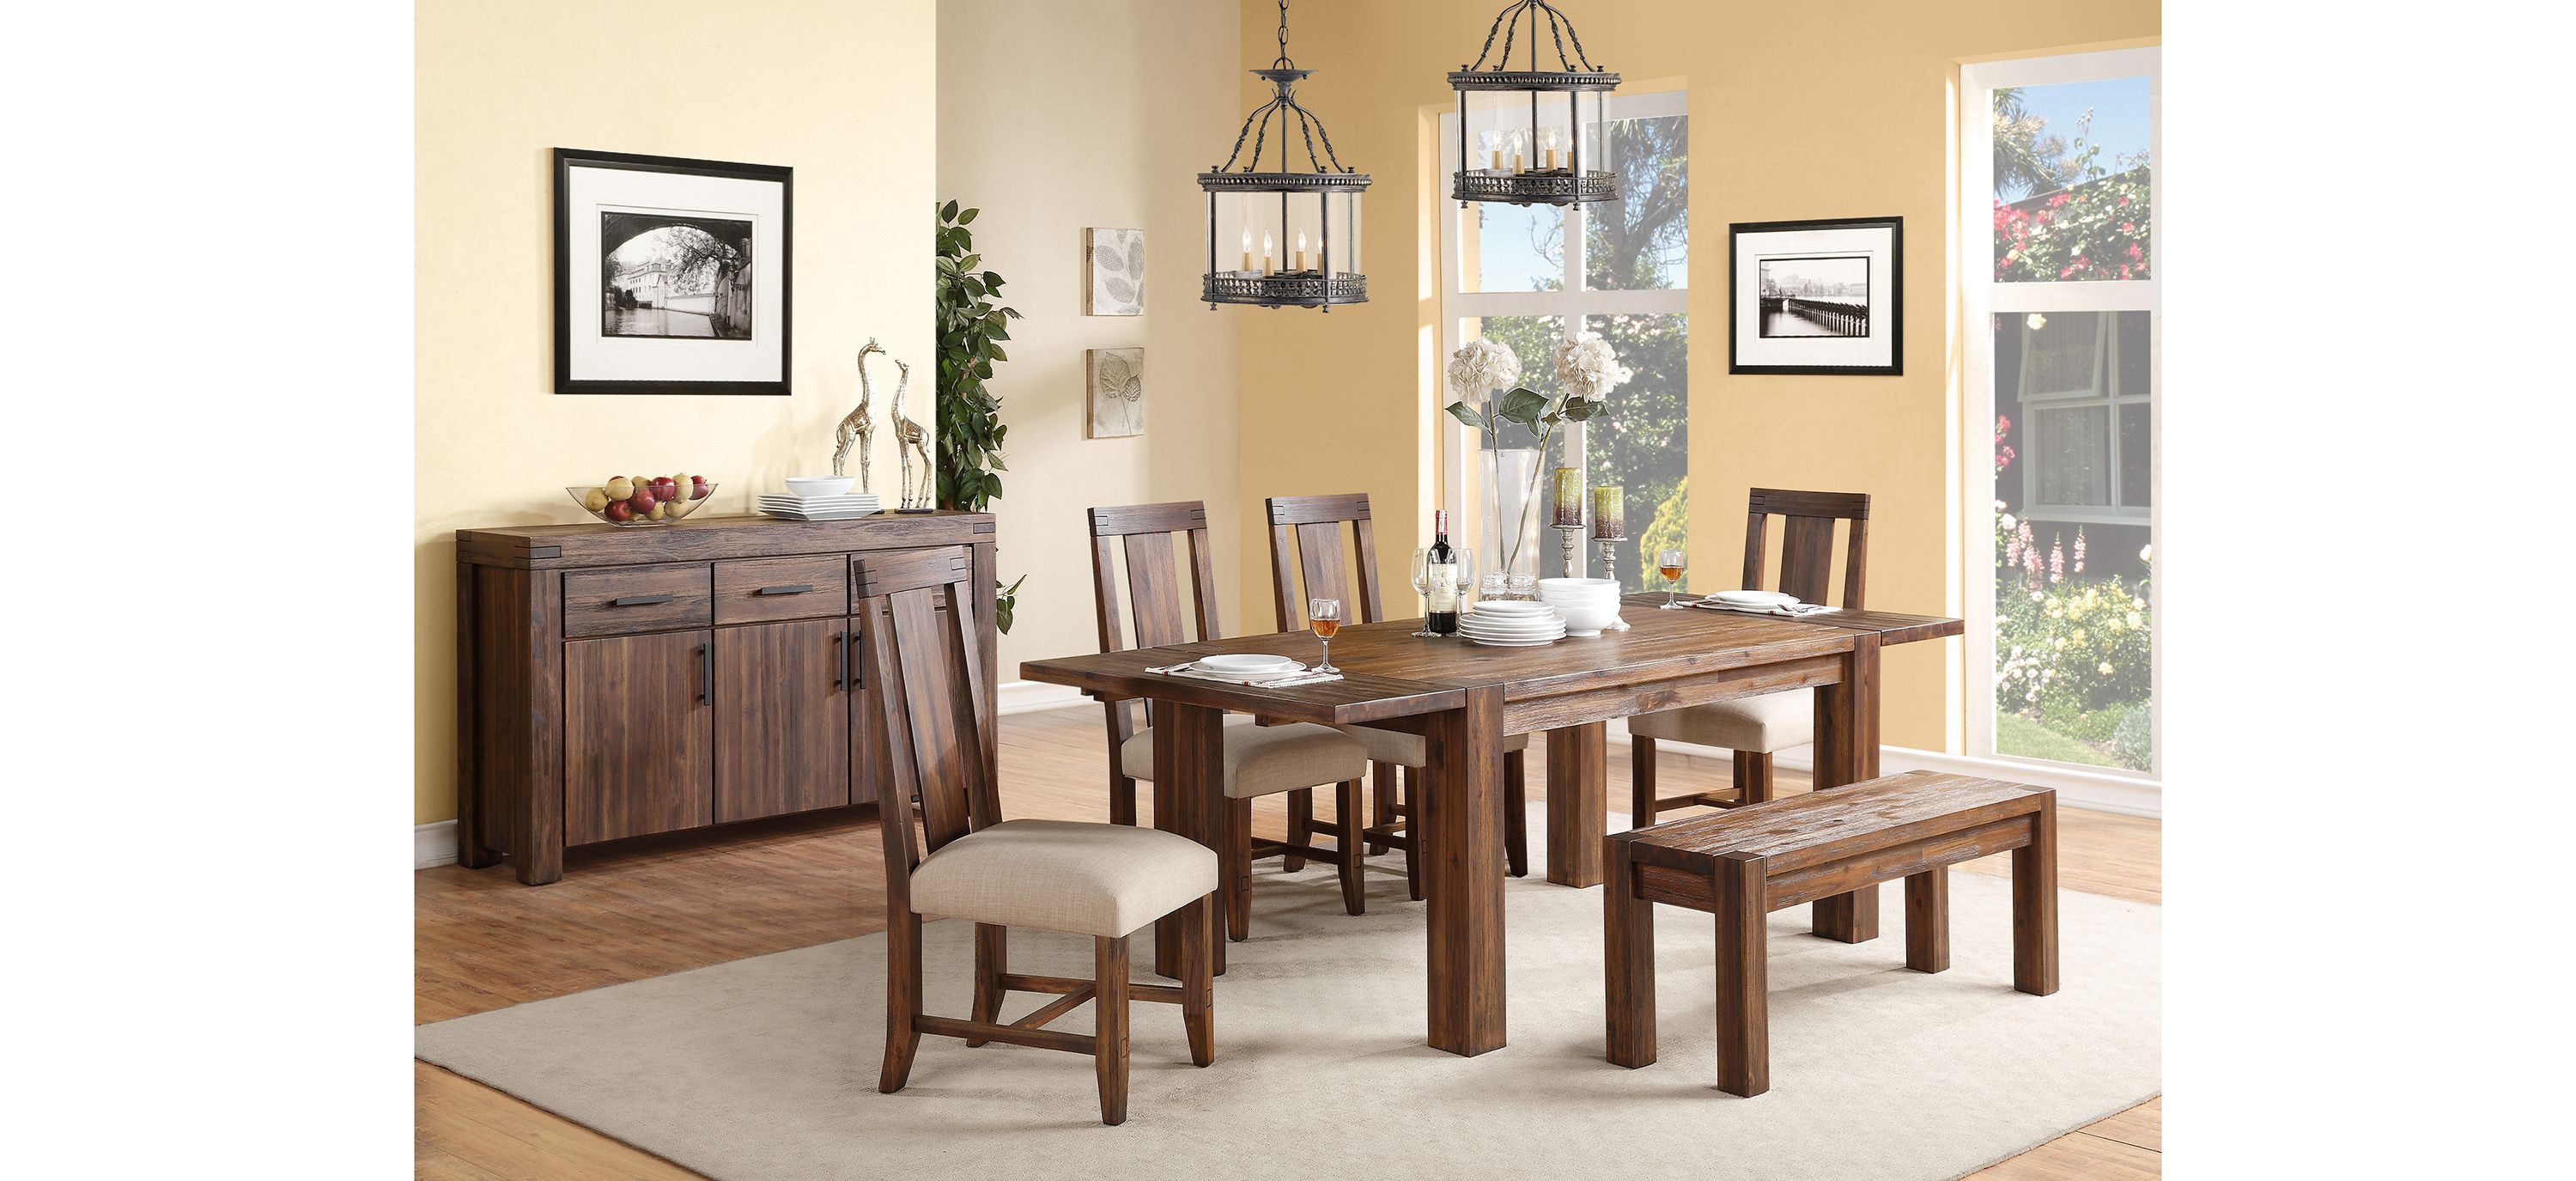 Middlefield 6-pc. Dining Set w/ Upholstered Chairs and Bench